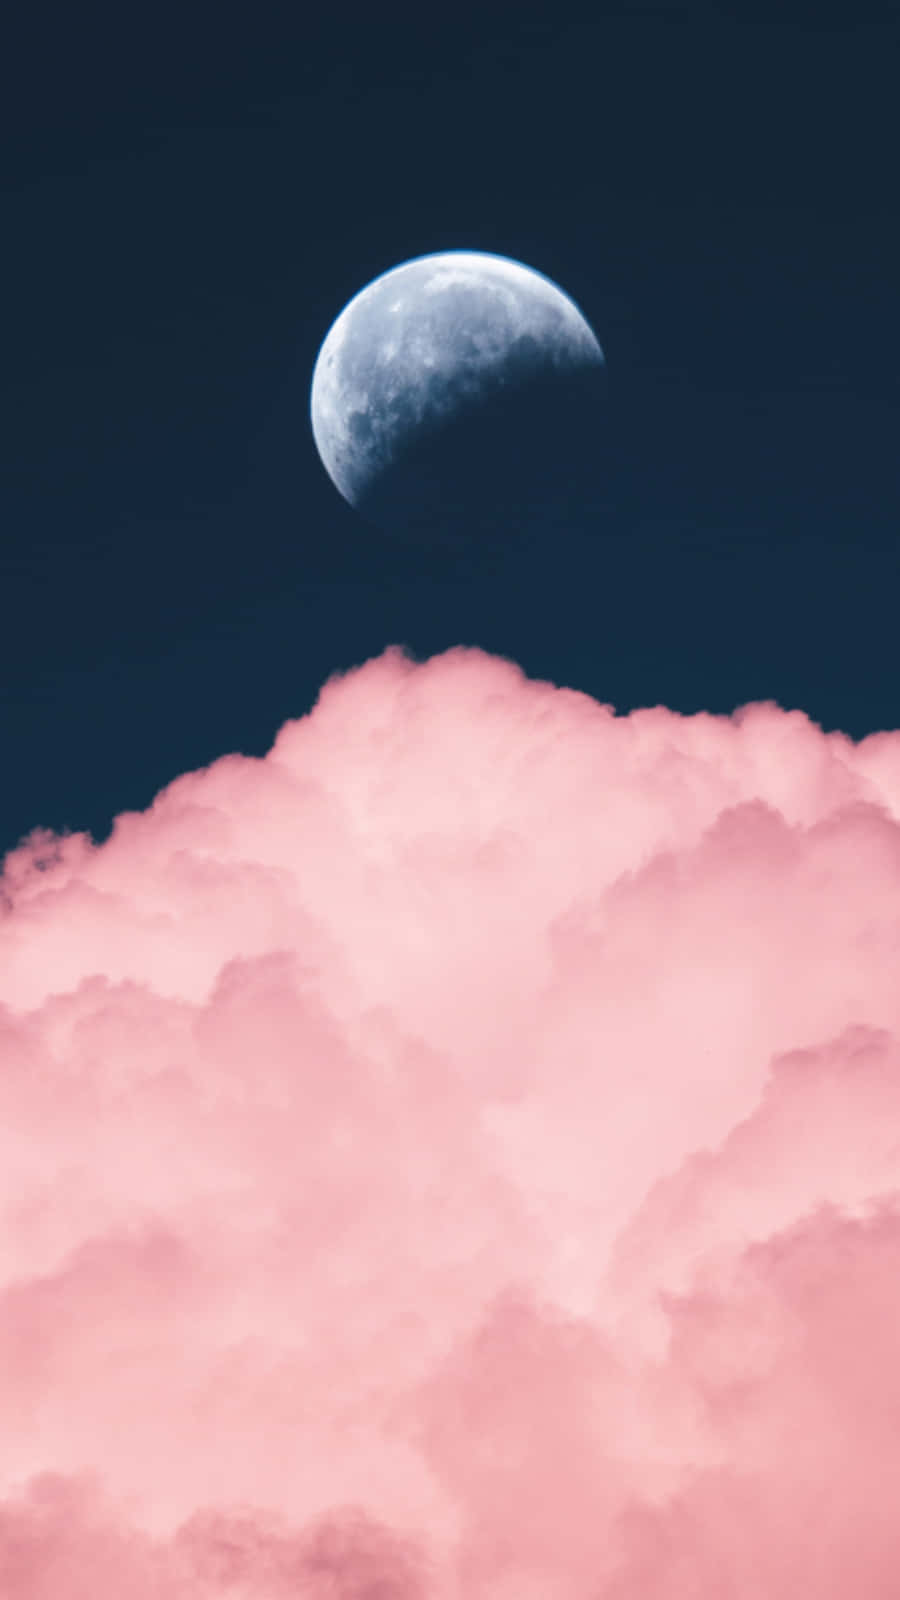 Soft and dream-like: a pastel pink and blue aesthetic wallpaper Wallpaper